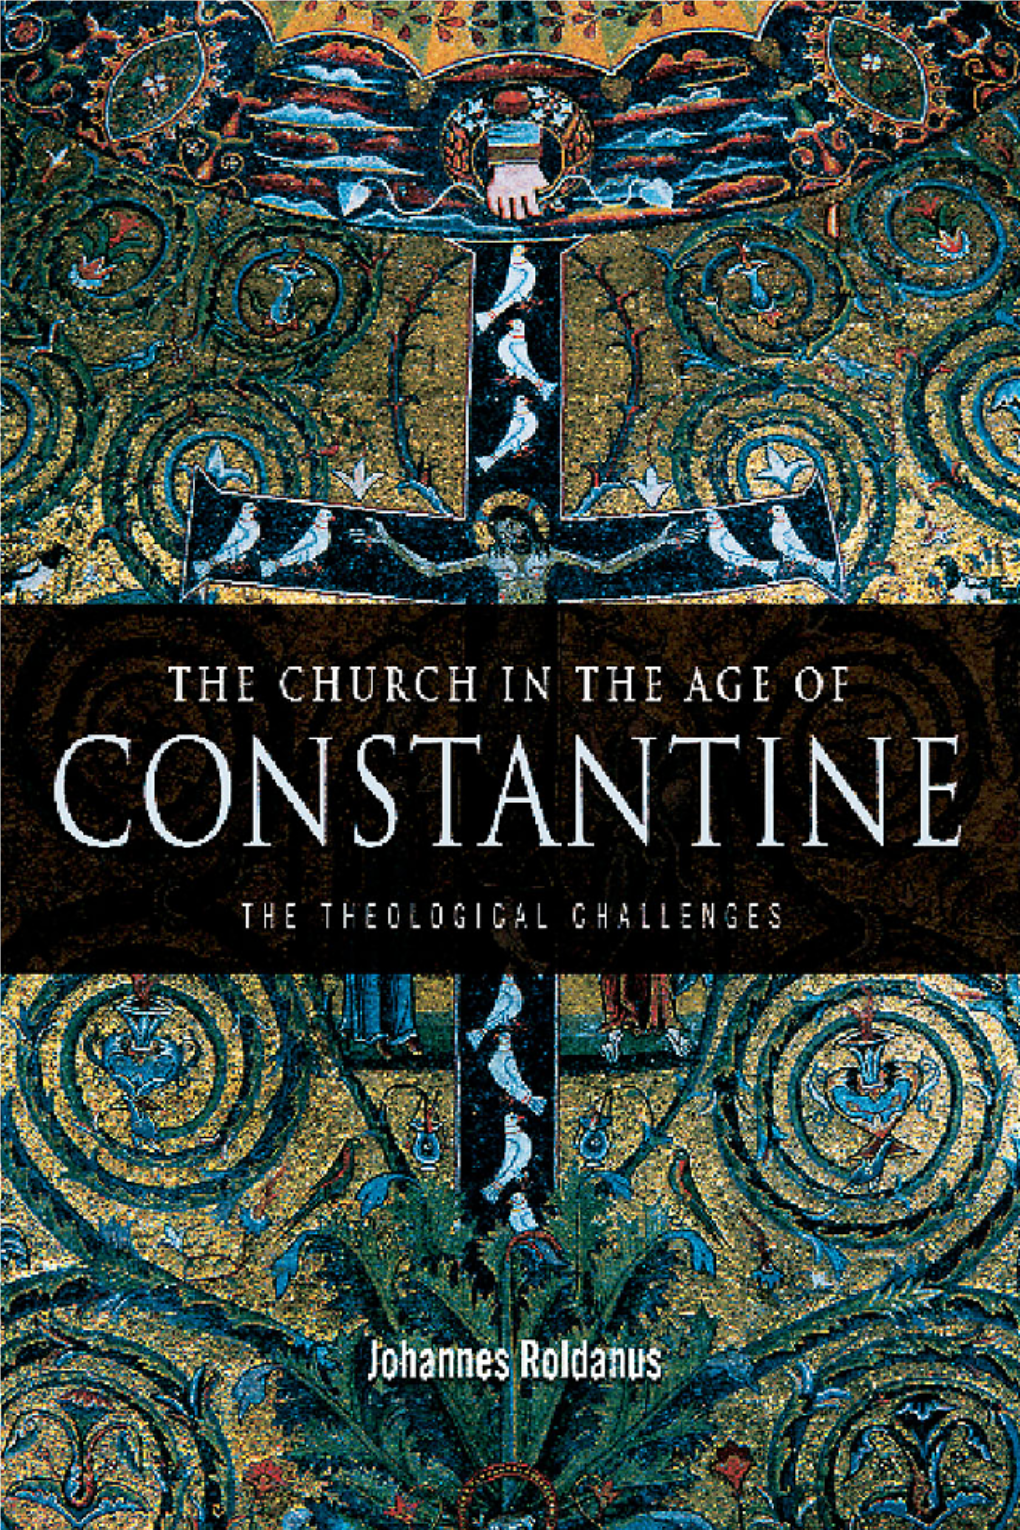 The Church in the Age of Constantine